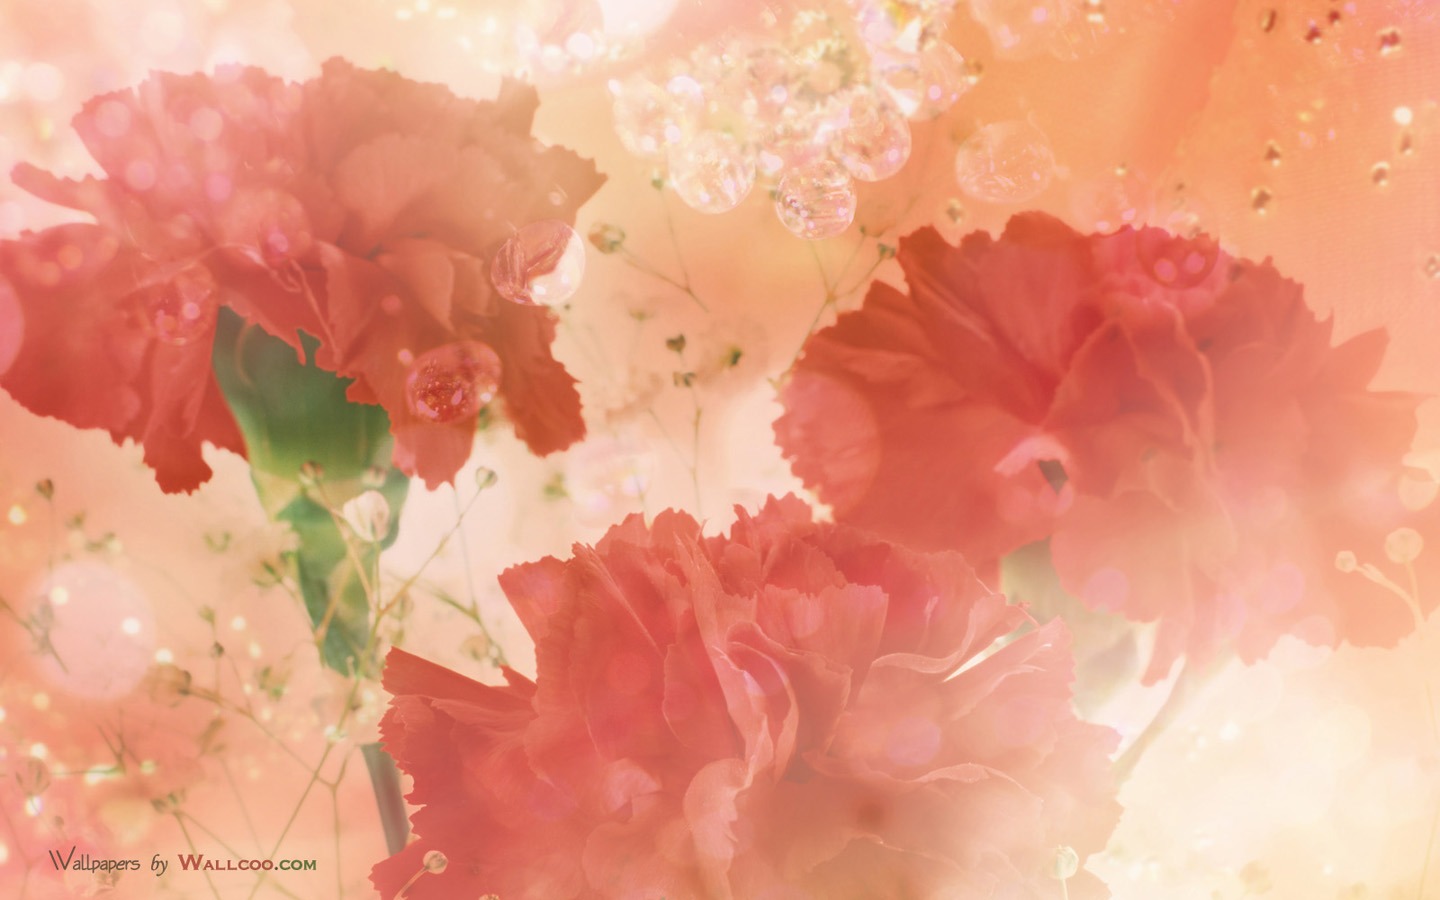 Mother's Day of the carnation wallpaper albums #40 - 1440x900